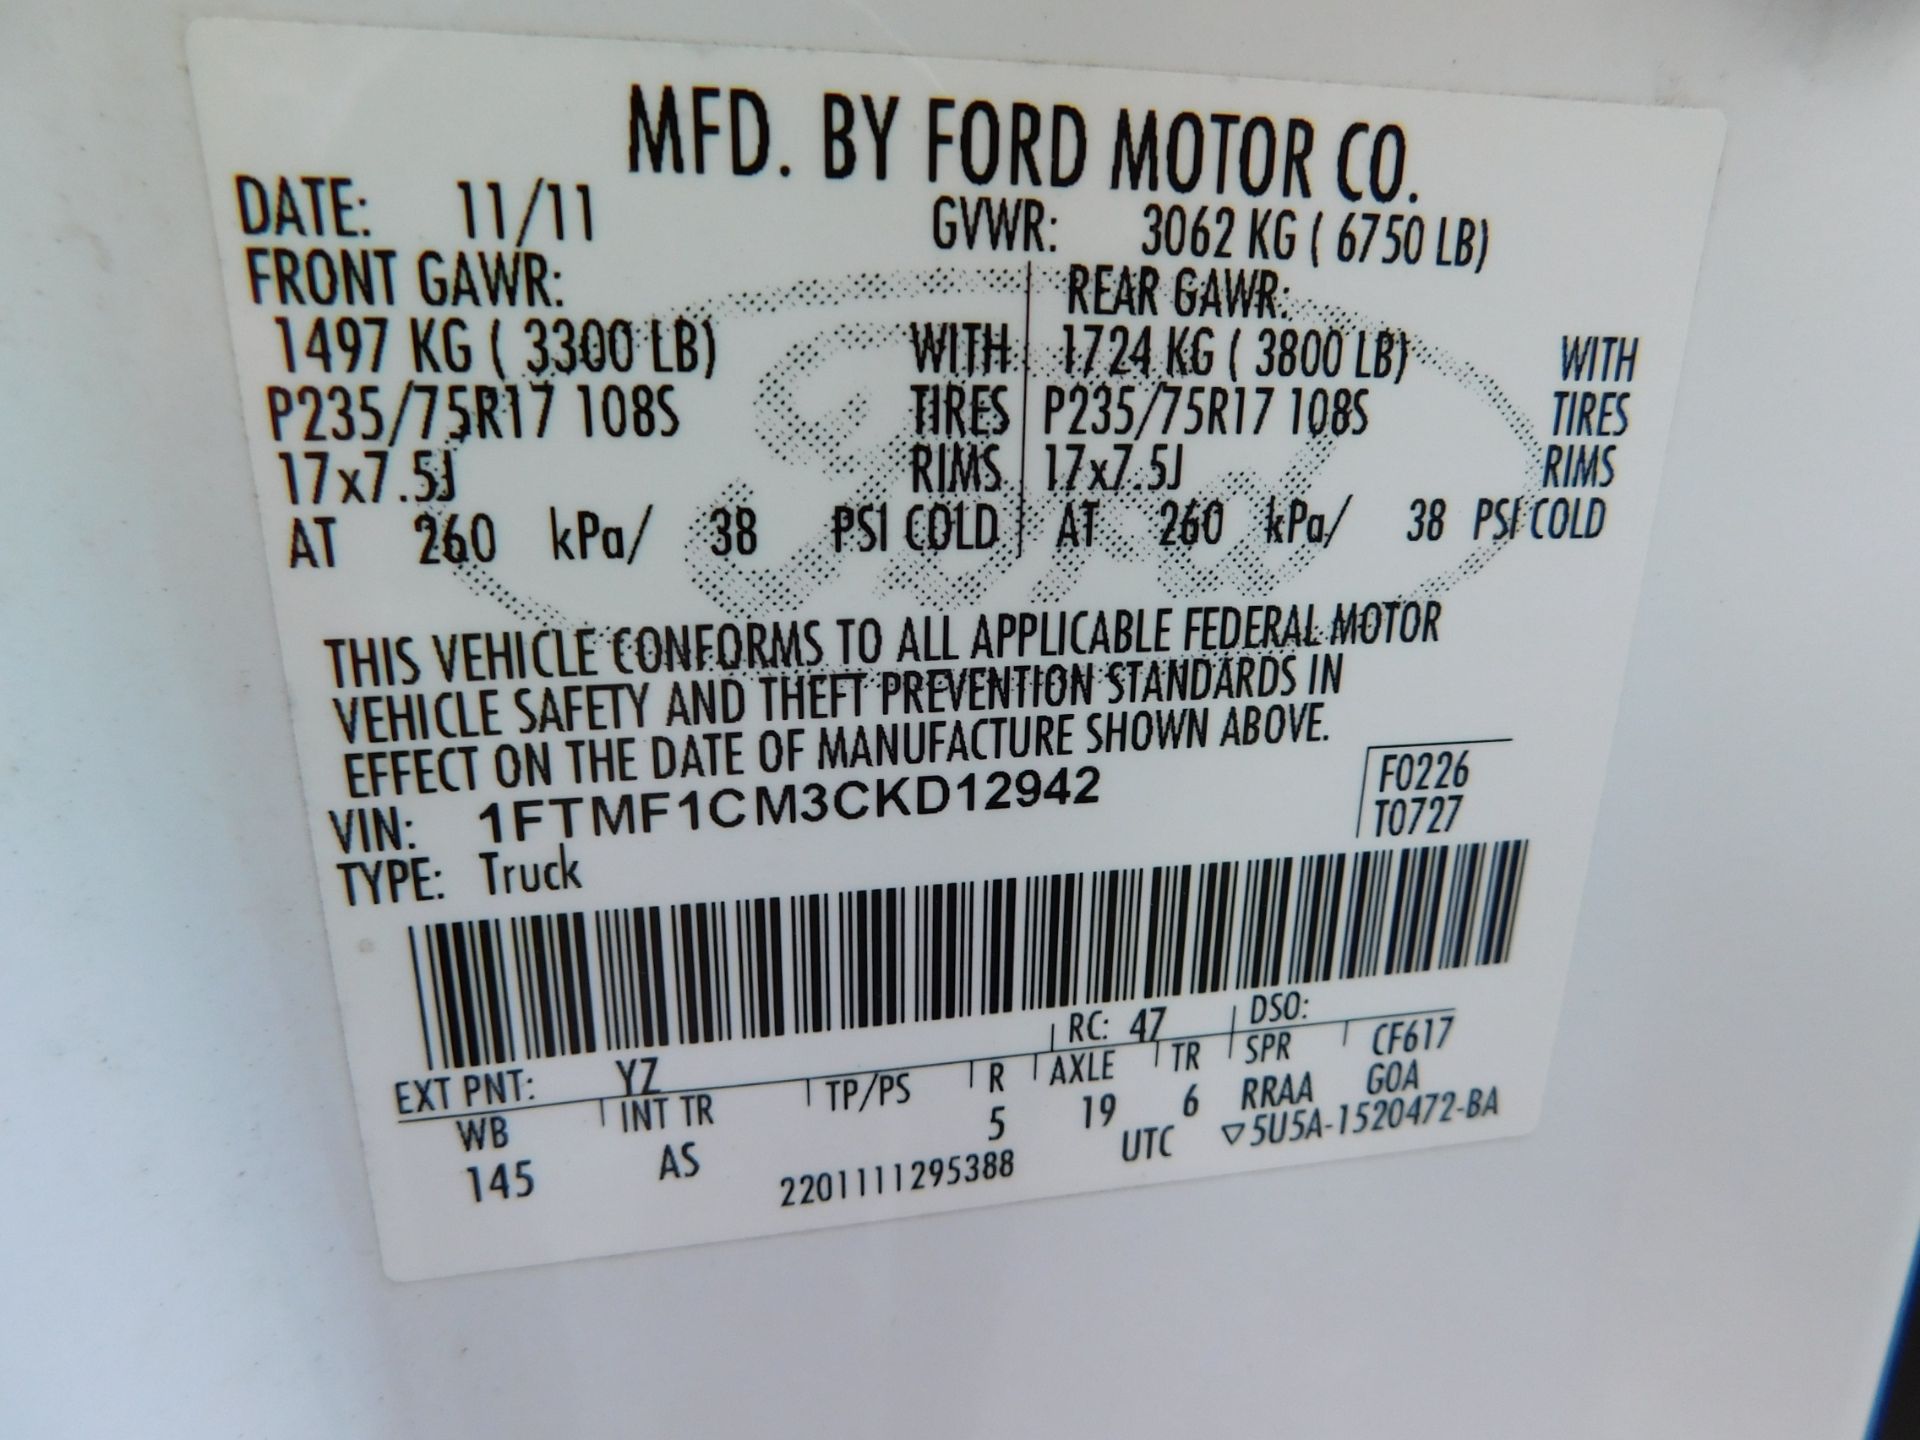 2011 Ford Pick up F-150XL vin 1FTMF1CM3CKD12942, Automatic Transmission, PW, Pl, 8'Bed w/Cap 146,289 - Image 39 of 46